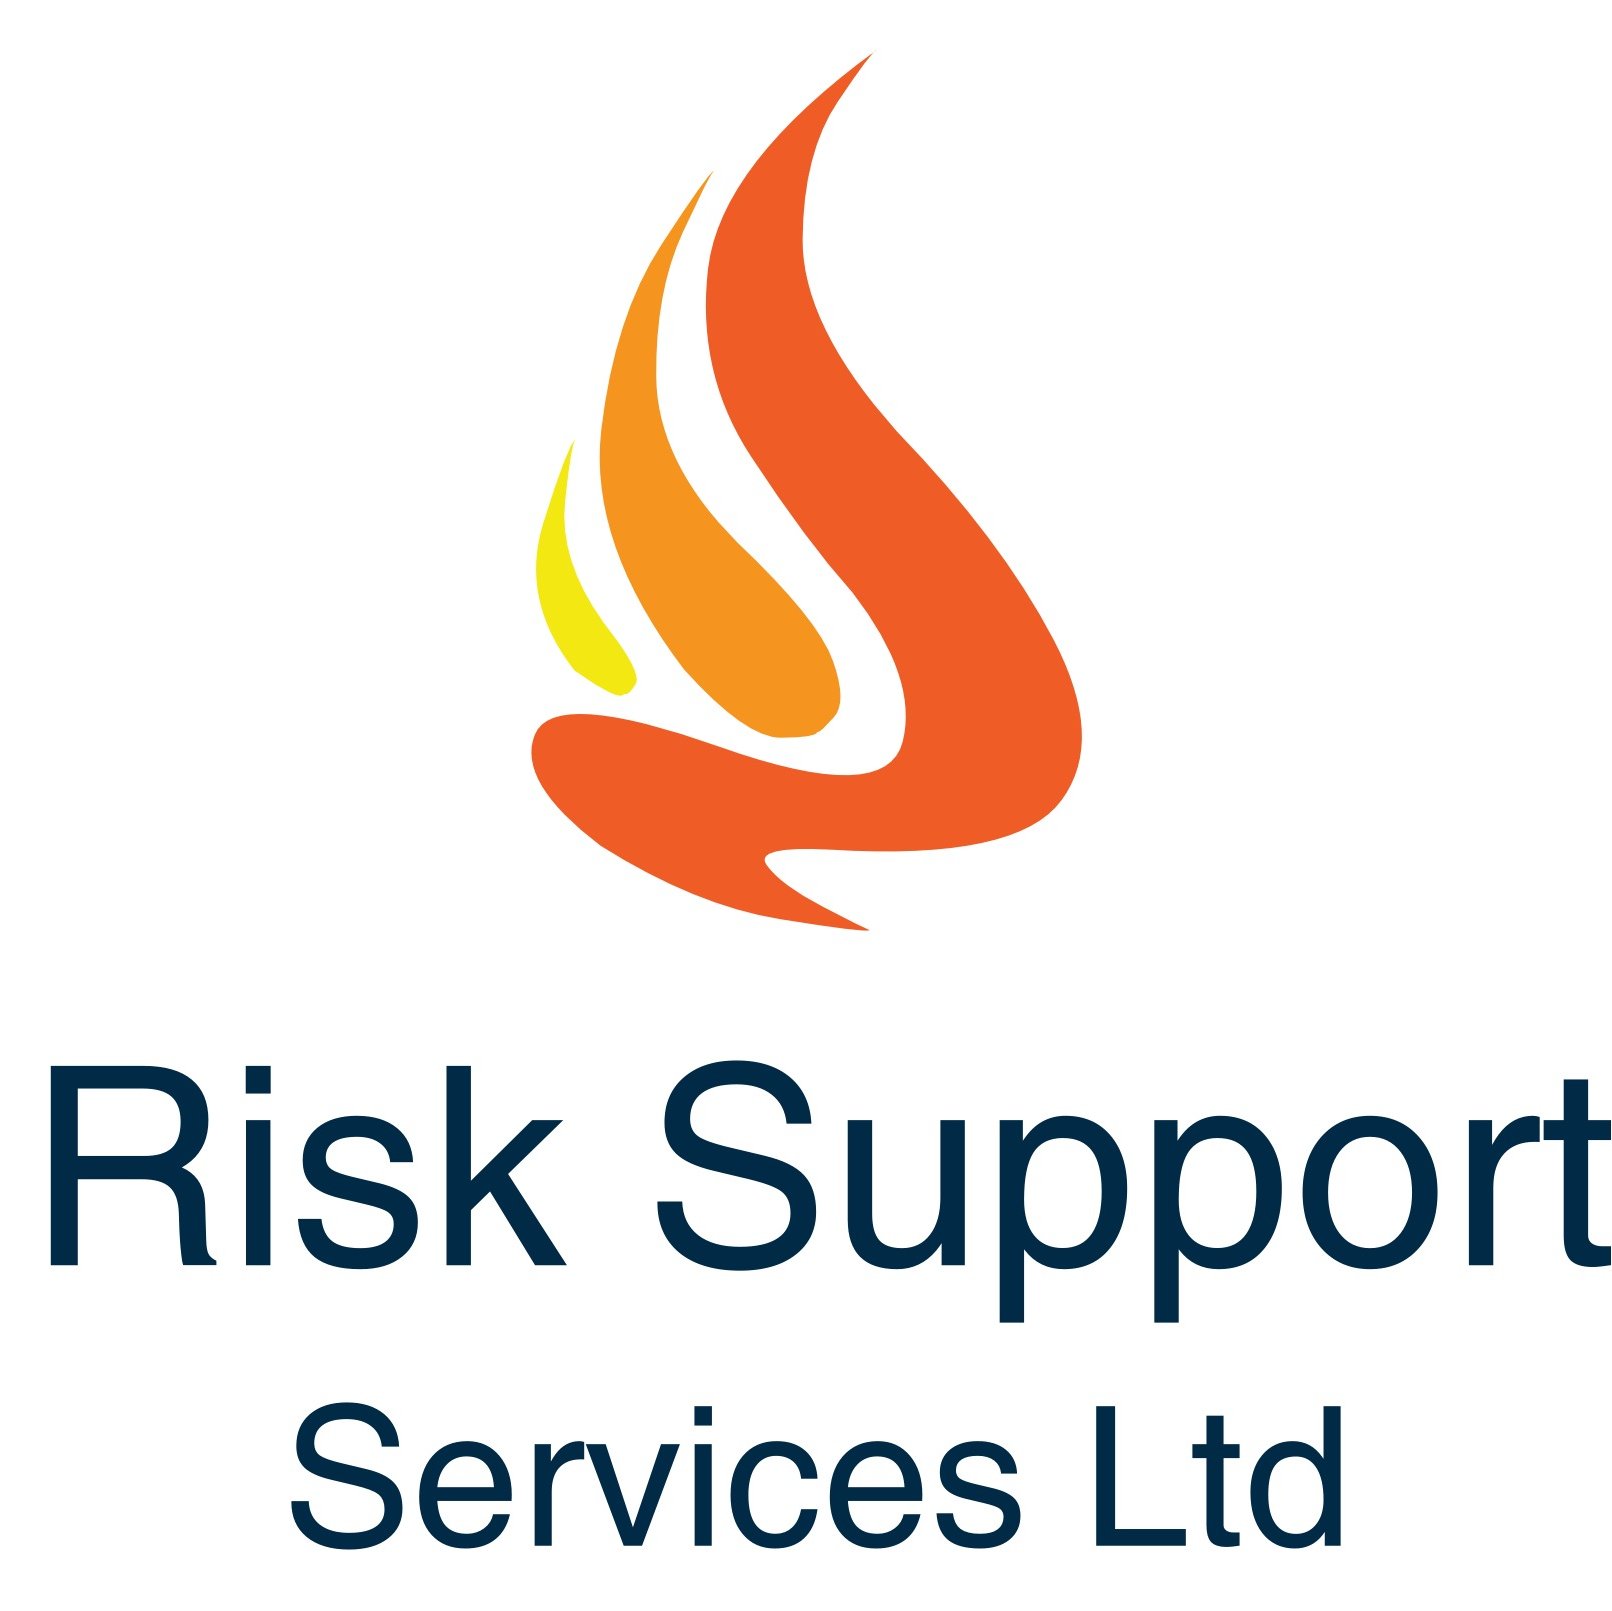 Risk Support Services  is the Risk Management Division of Butterworth Spengler Insurance Group. We specialise in Health and Safety Risk Management and Training.